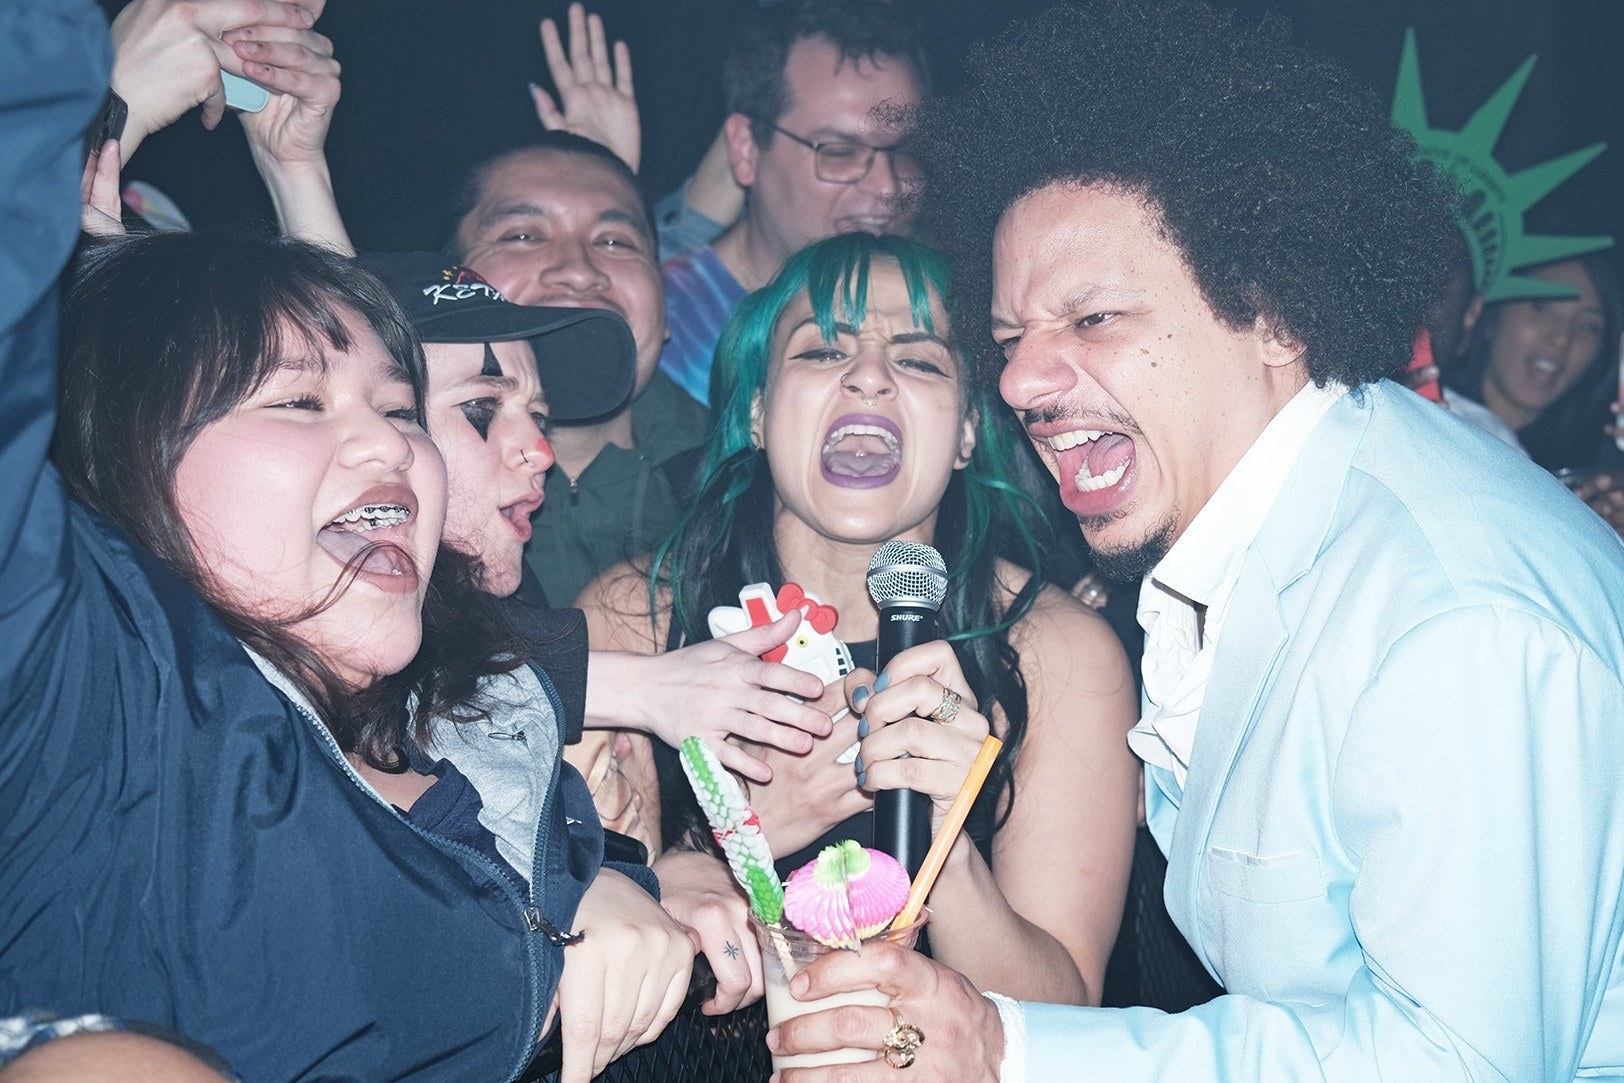 Eric André and several partygoers yell into a microphone